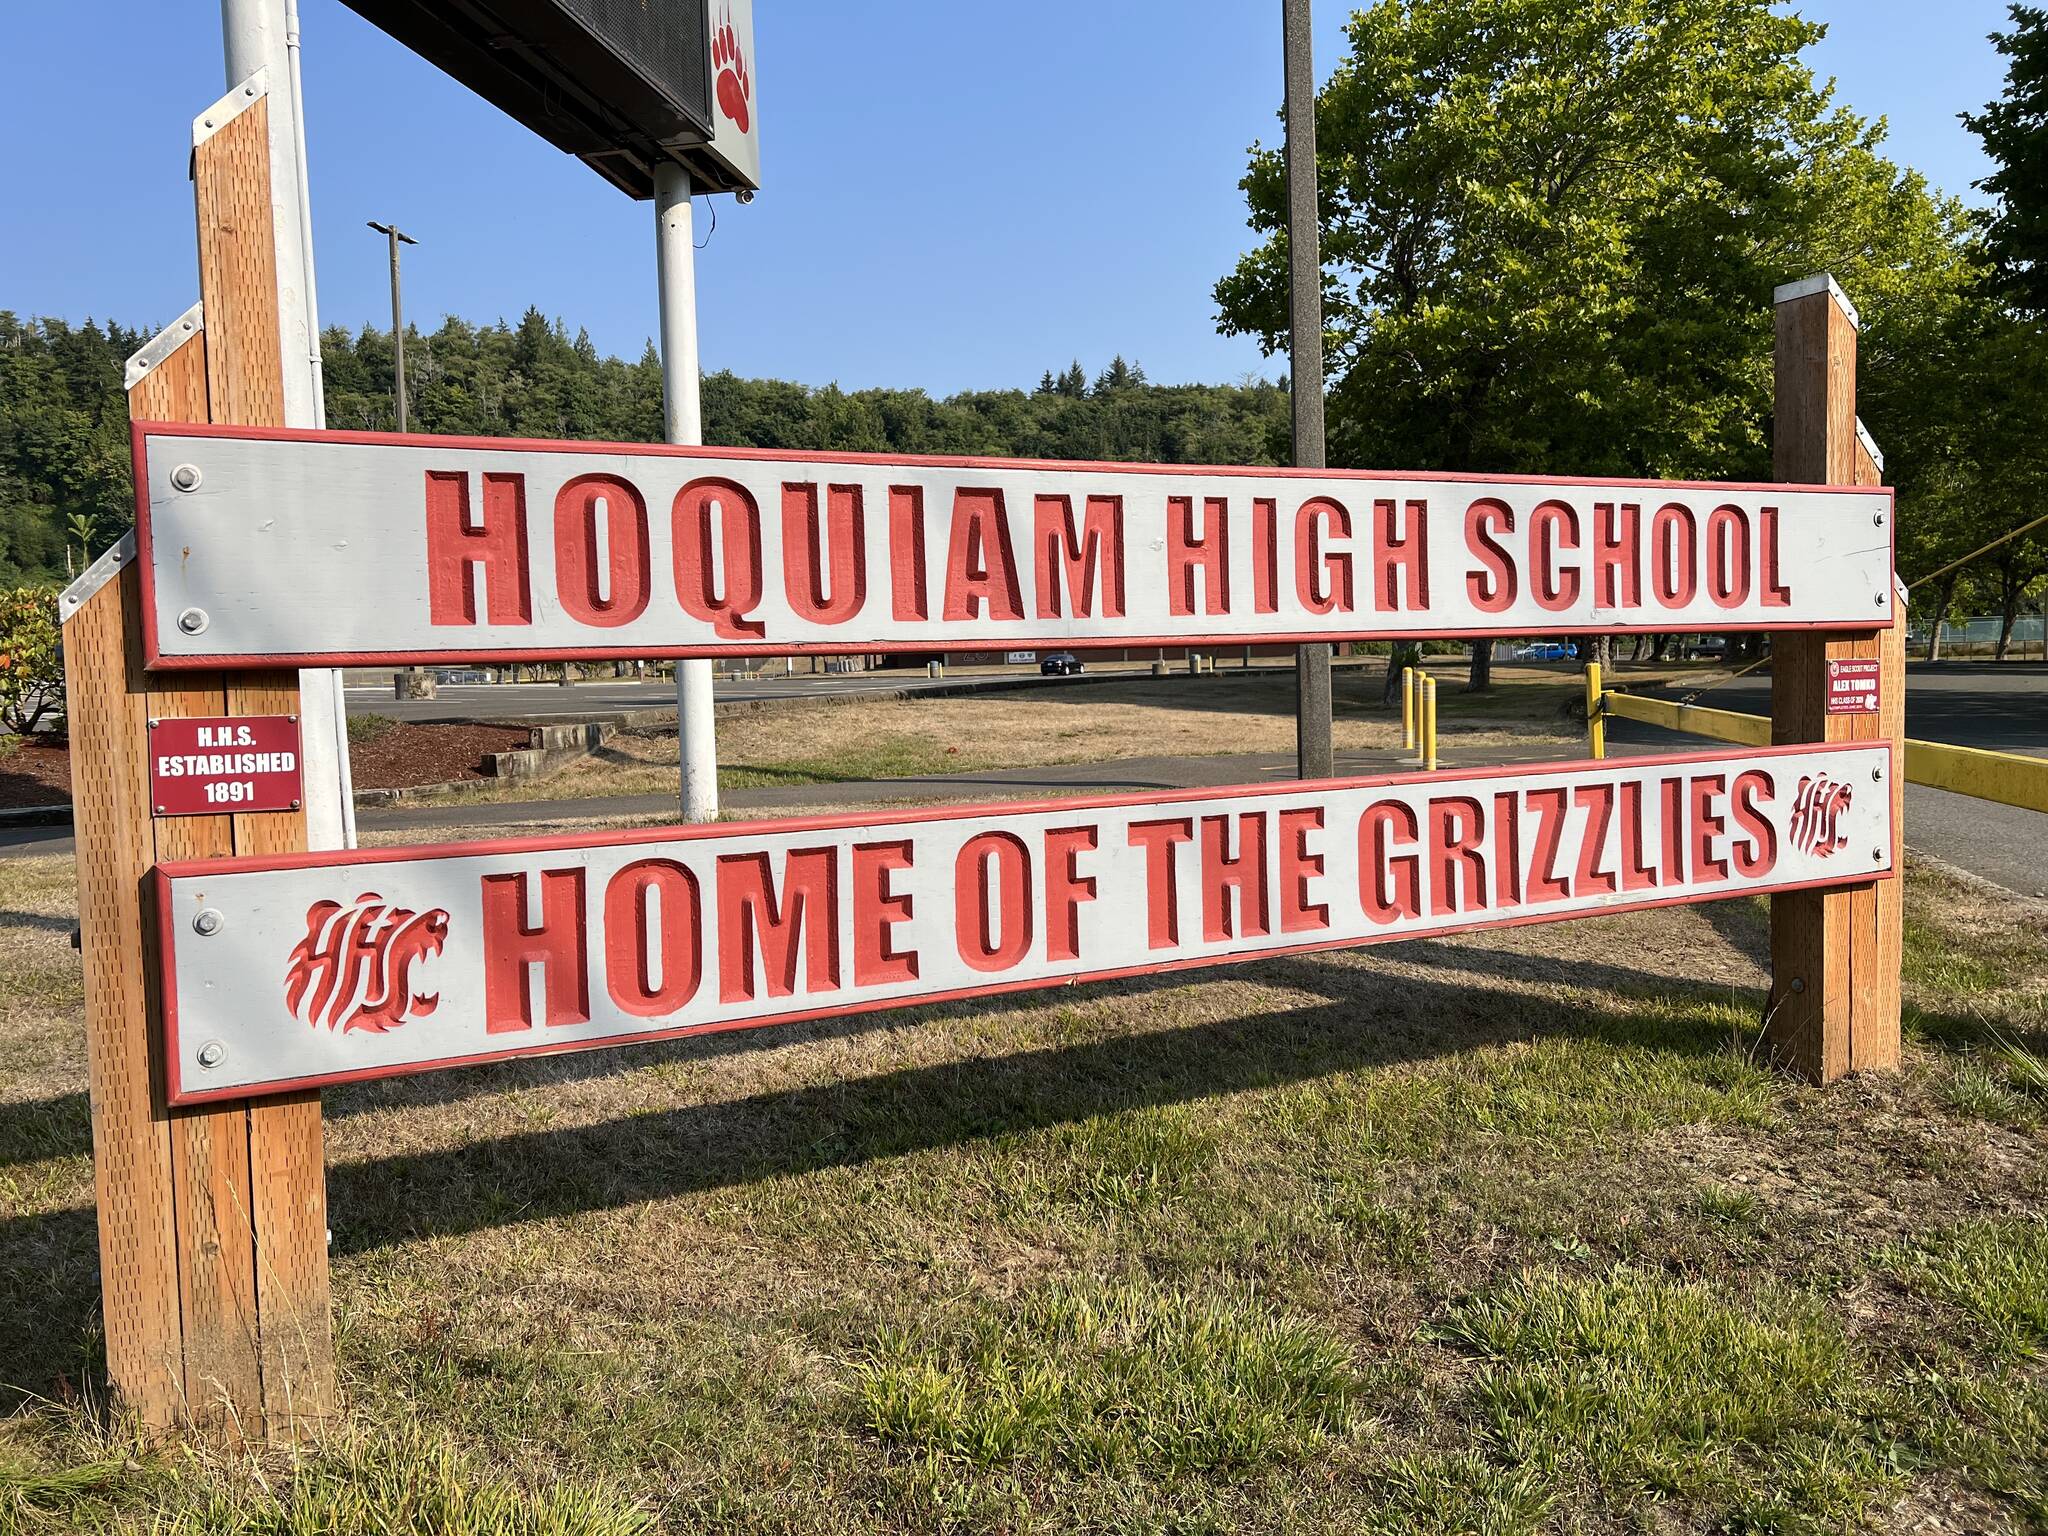 Clayton Franke / The Daily World
The Hoquiam School Board approved a $42 million bond for building modernizations that will appear before voters on February’s general election ballot.